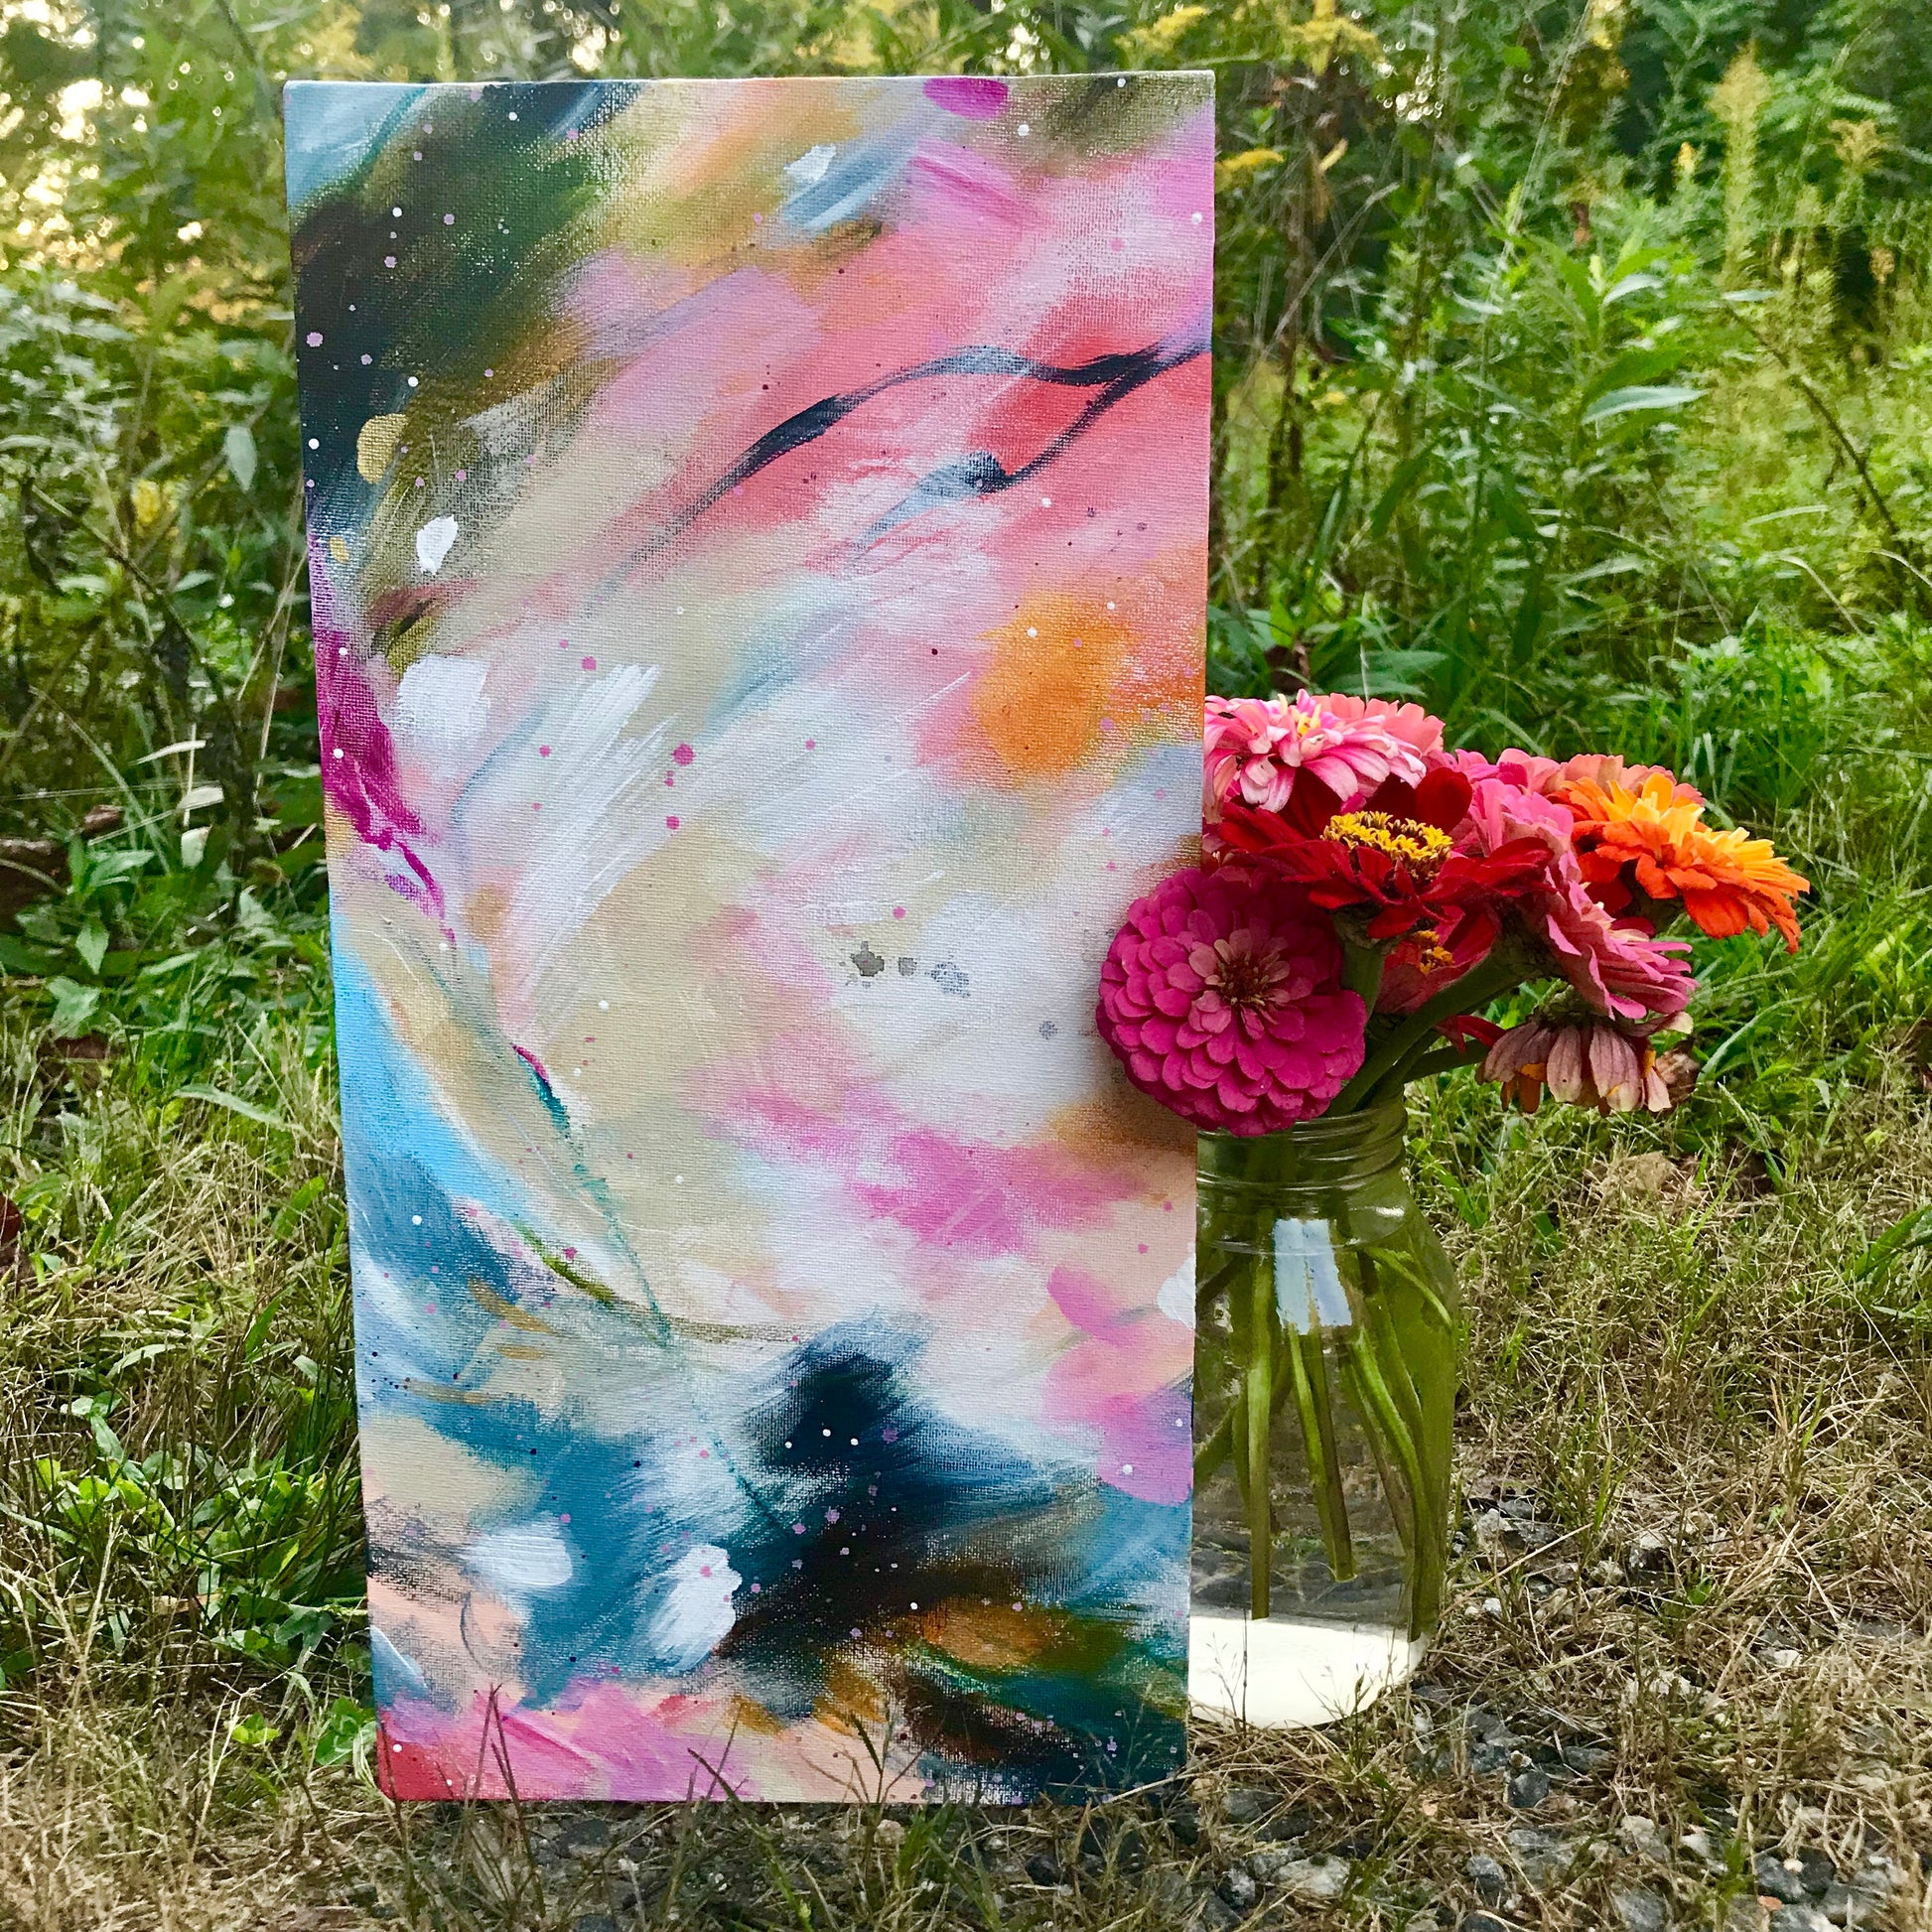 Abstract Original Painting "Love You More" 8x16 inch Canvas Panel - Bethany Joy Art